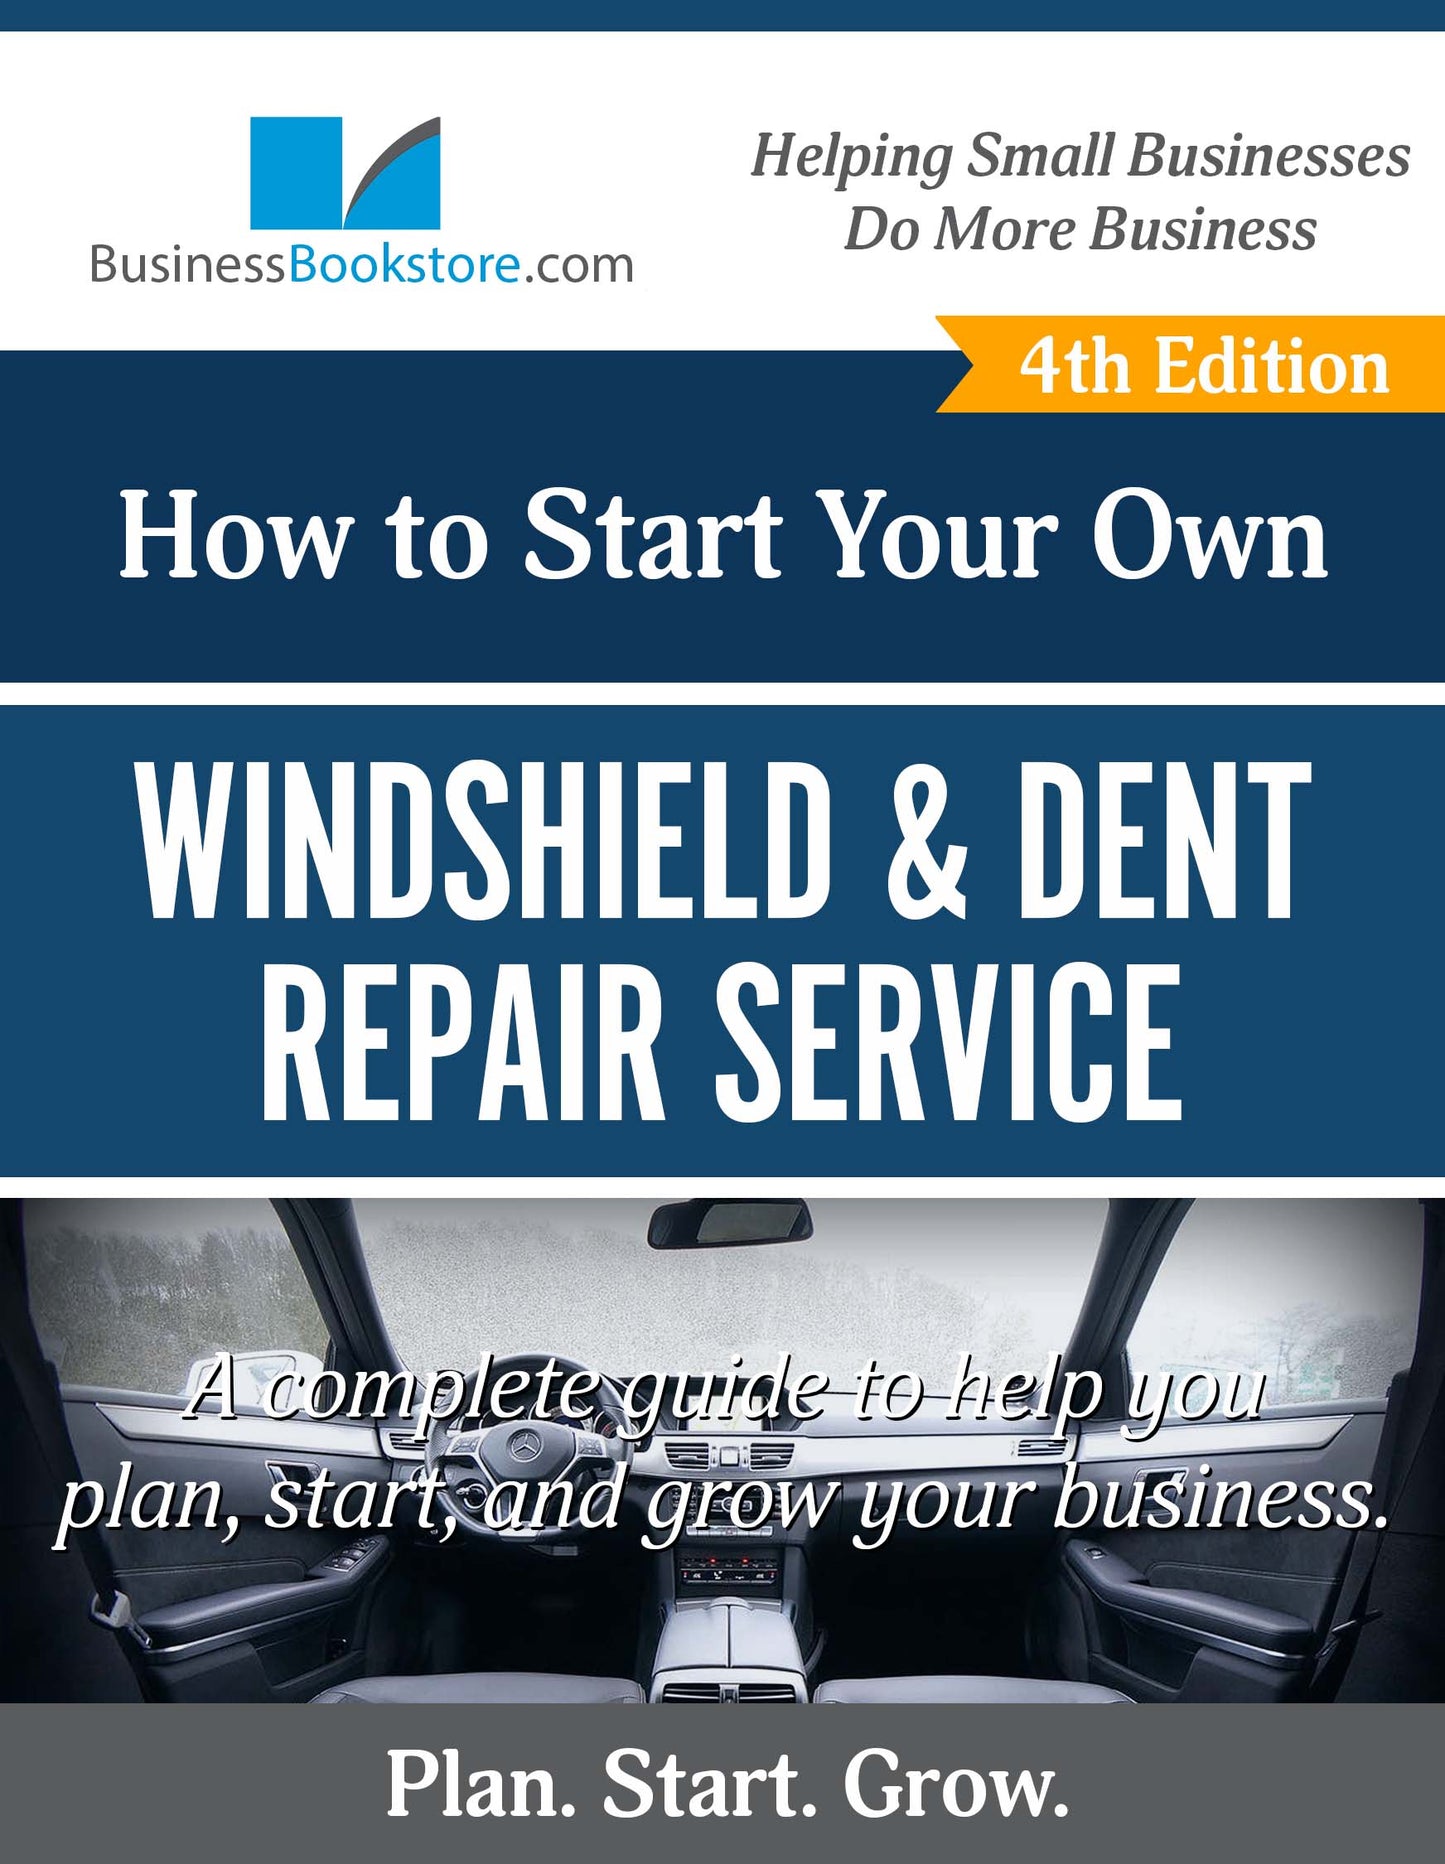 How to Start a Windshield and Dent Repair Service